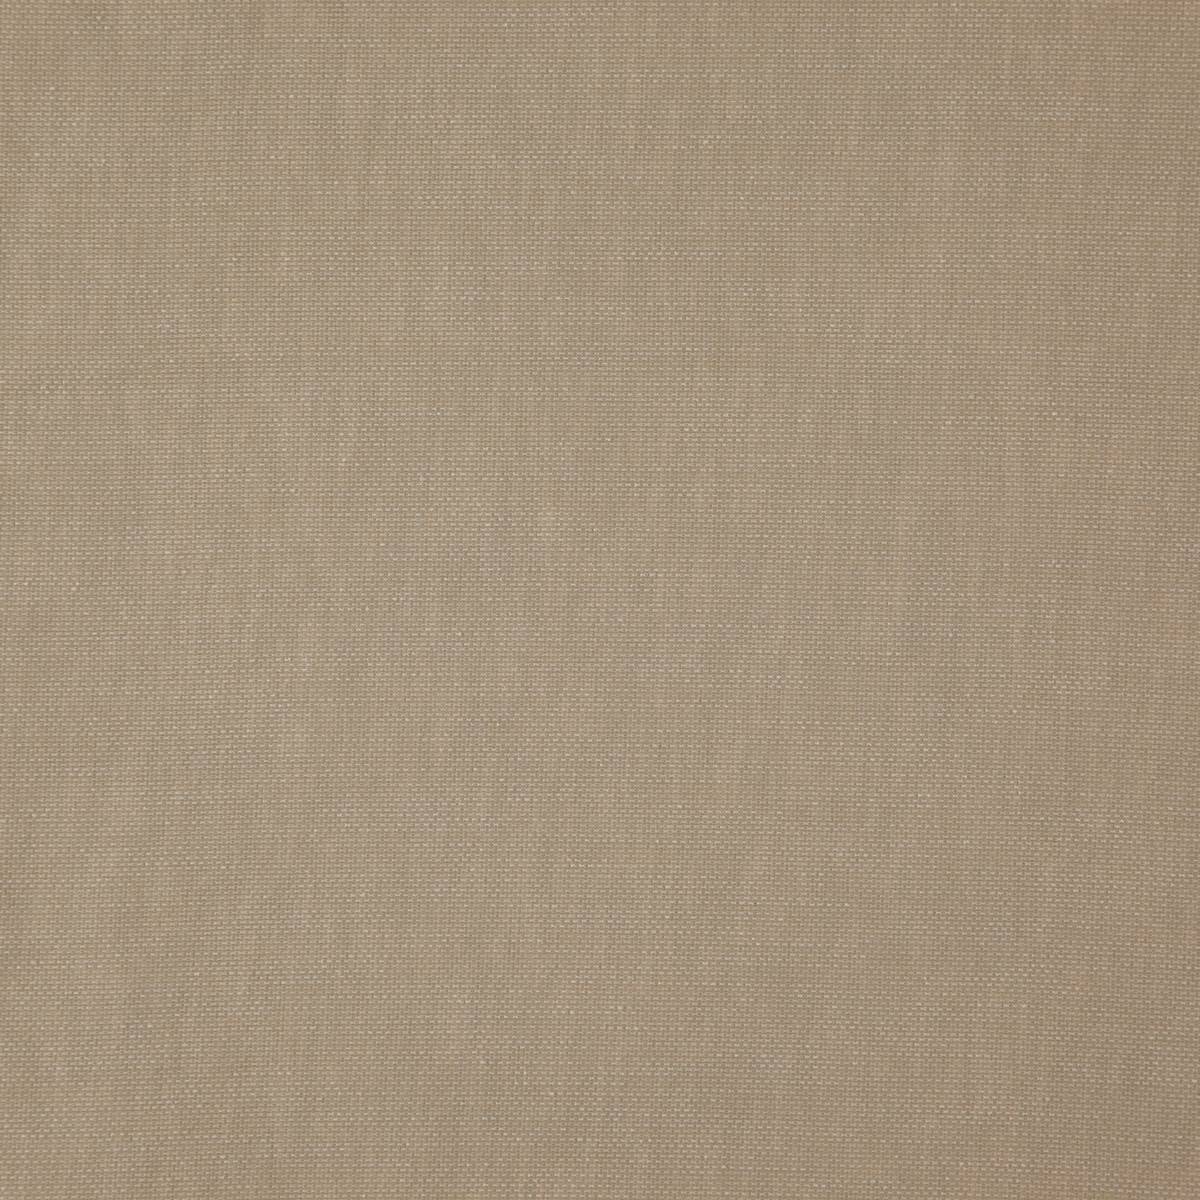 Forte Sepia Fabric by Harlequin